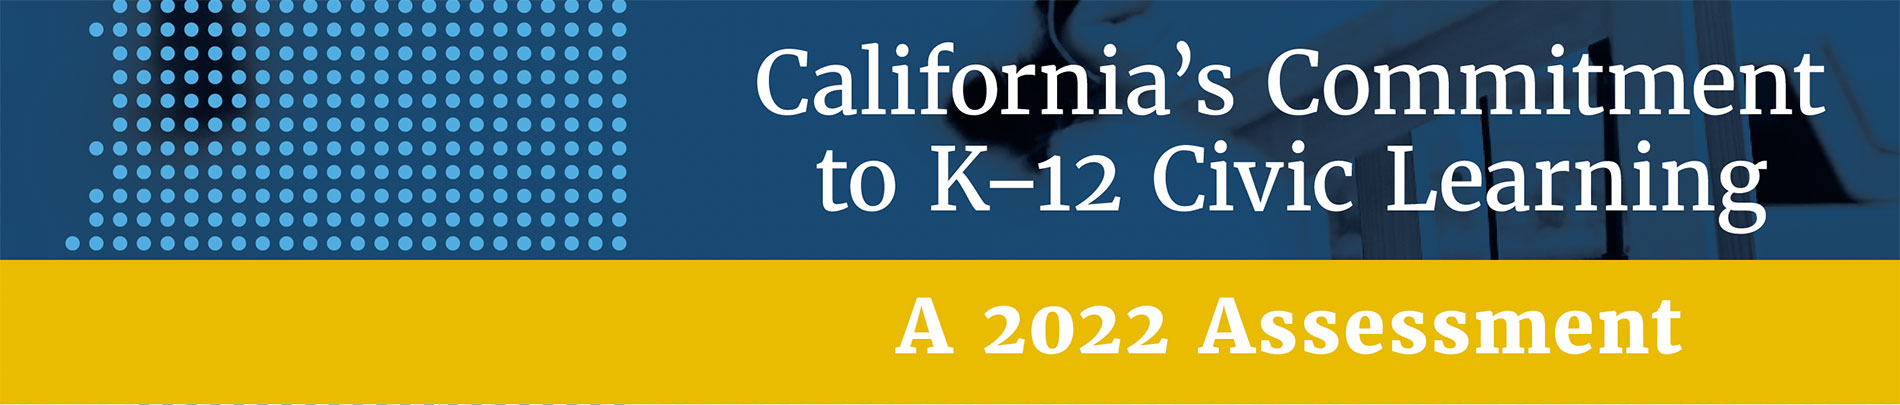 California’s Commitment to K-12 Civic Learning: A 2022 Assessment